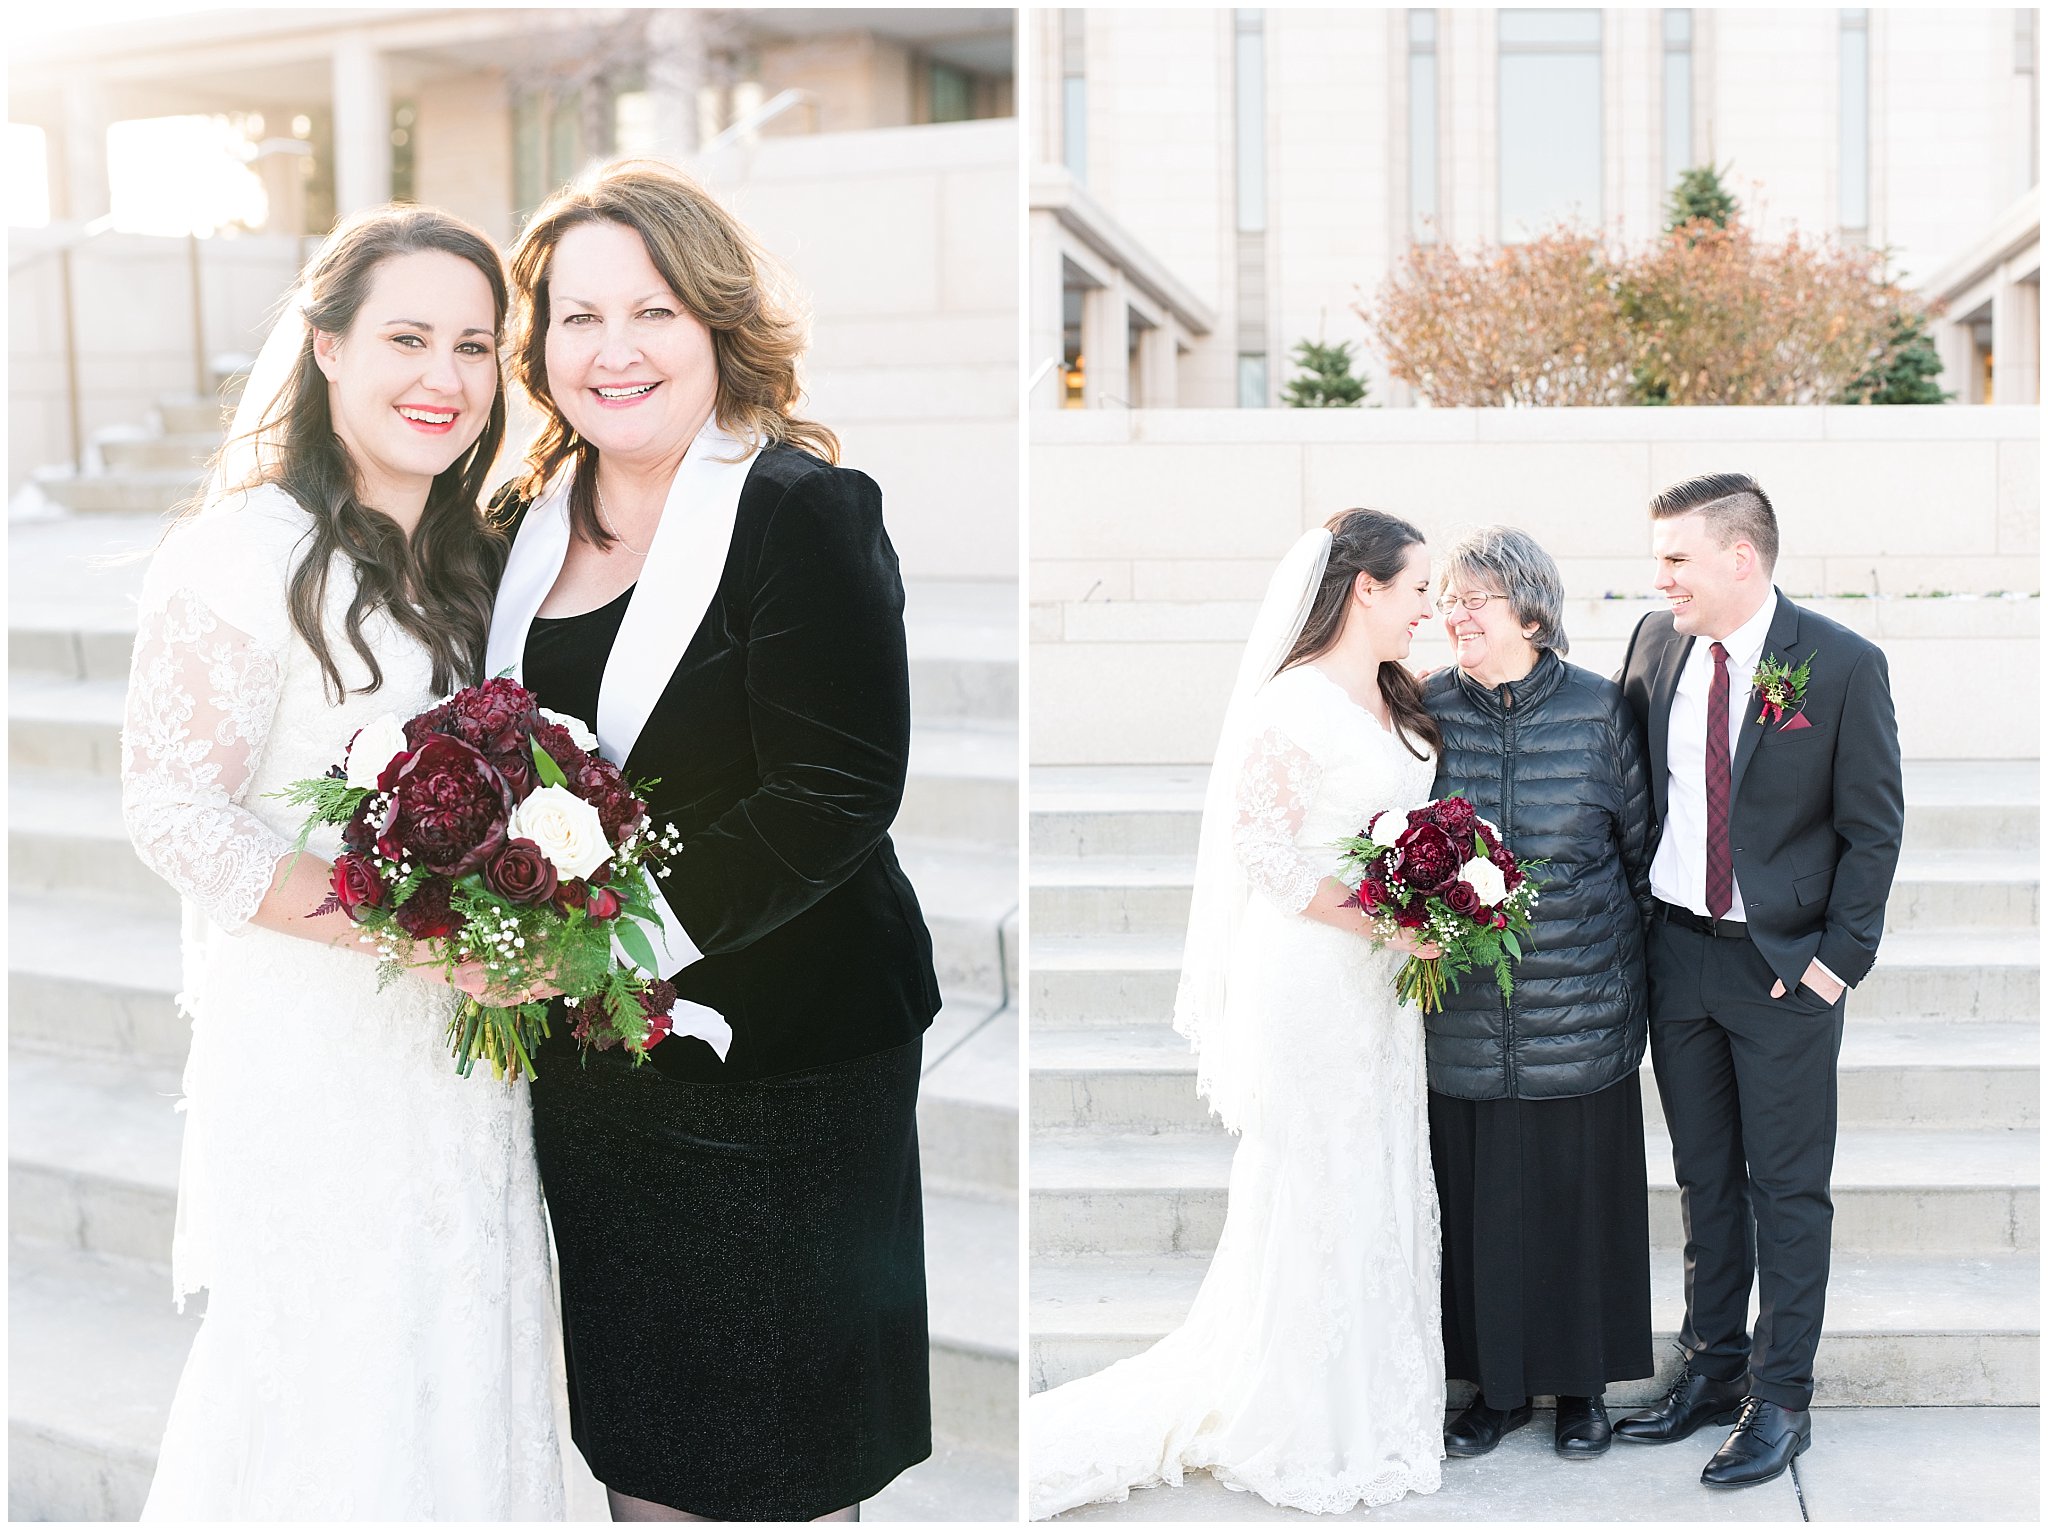 Wedding day family portraits at the Oquirrh Mountain Temple | Oquirrh Mountain Temple and Gardner Village Wedding | The Gathering Place | Jessie and Dallin Photography